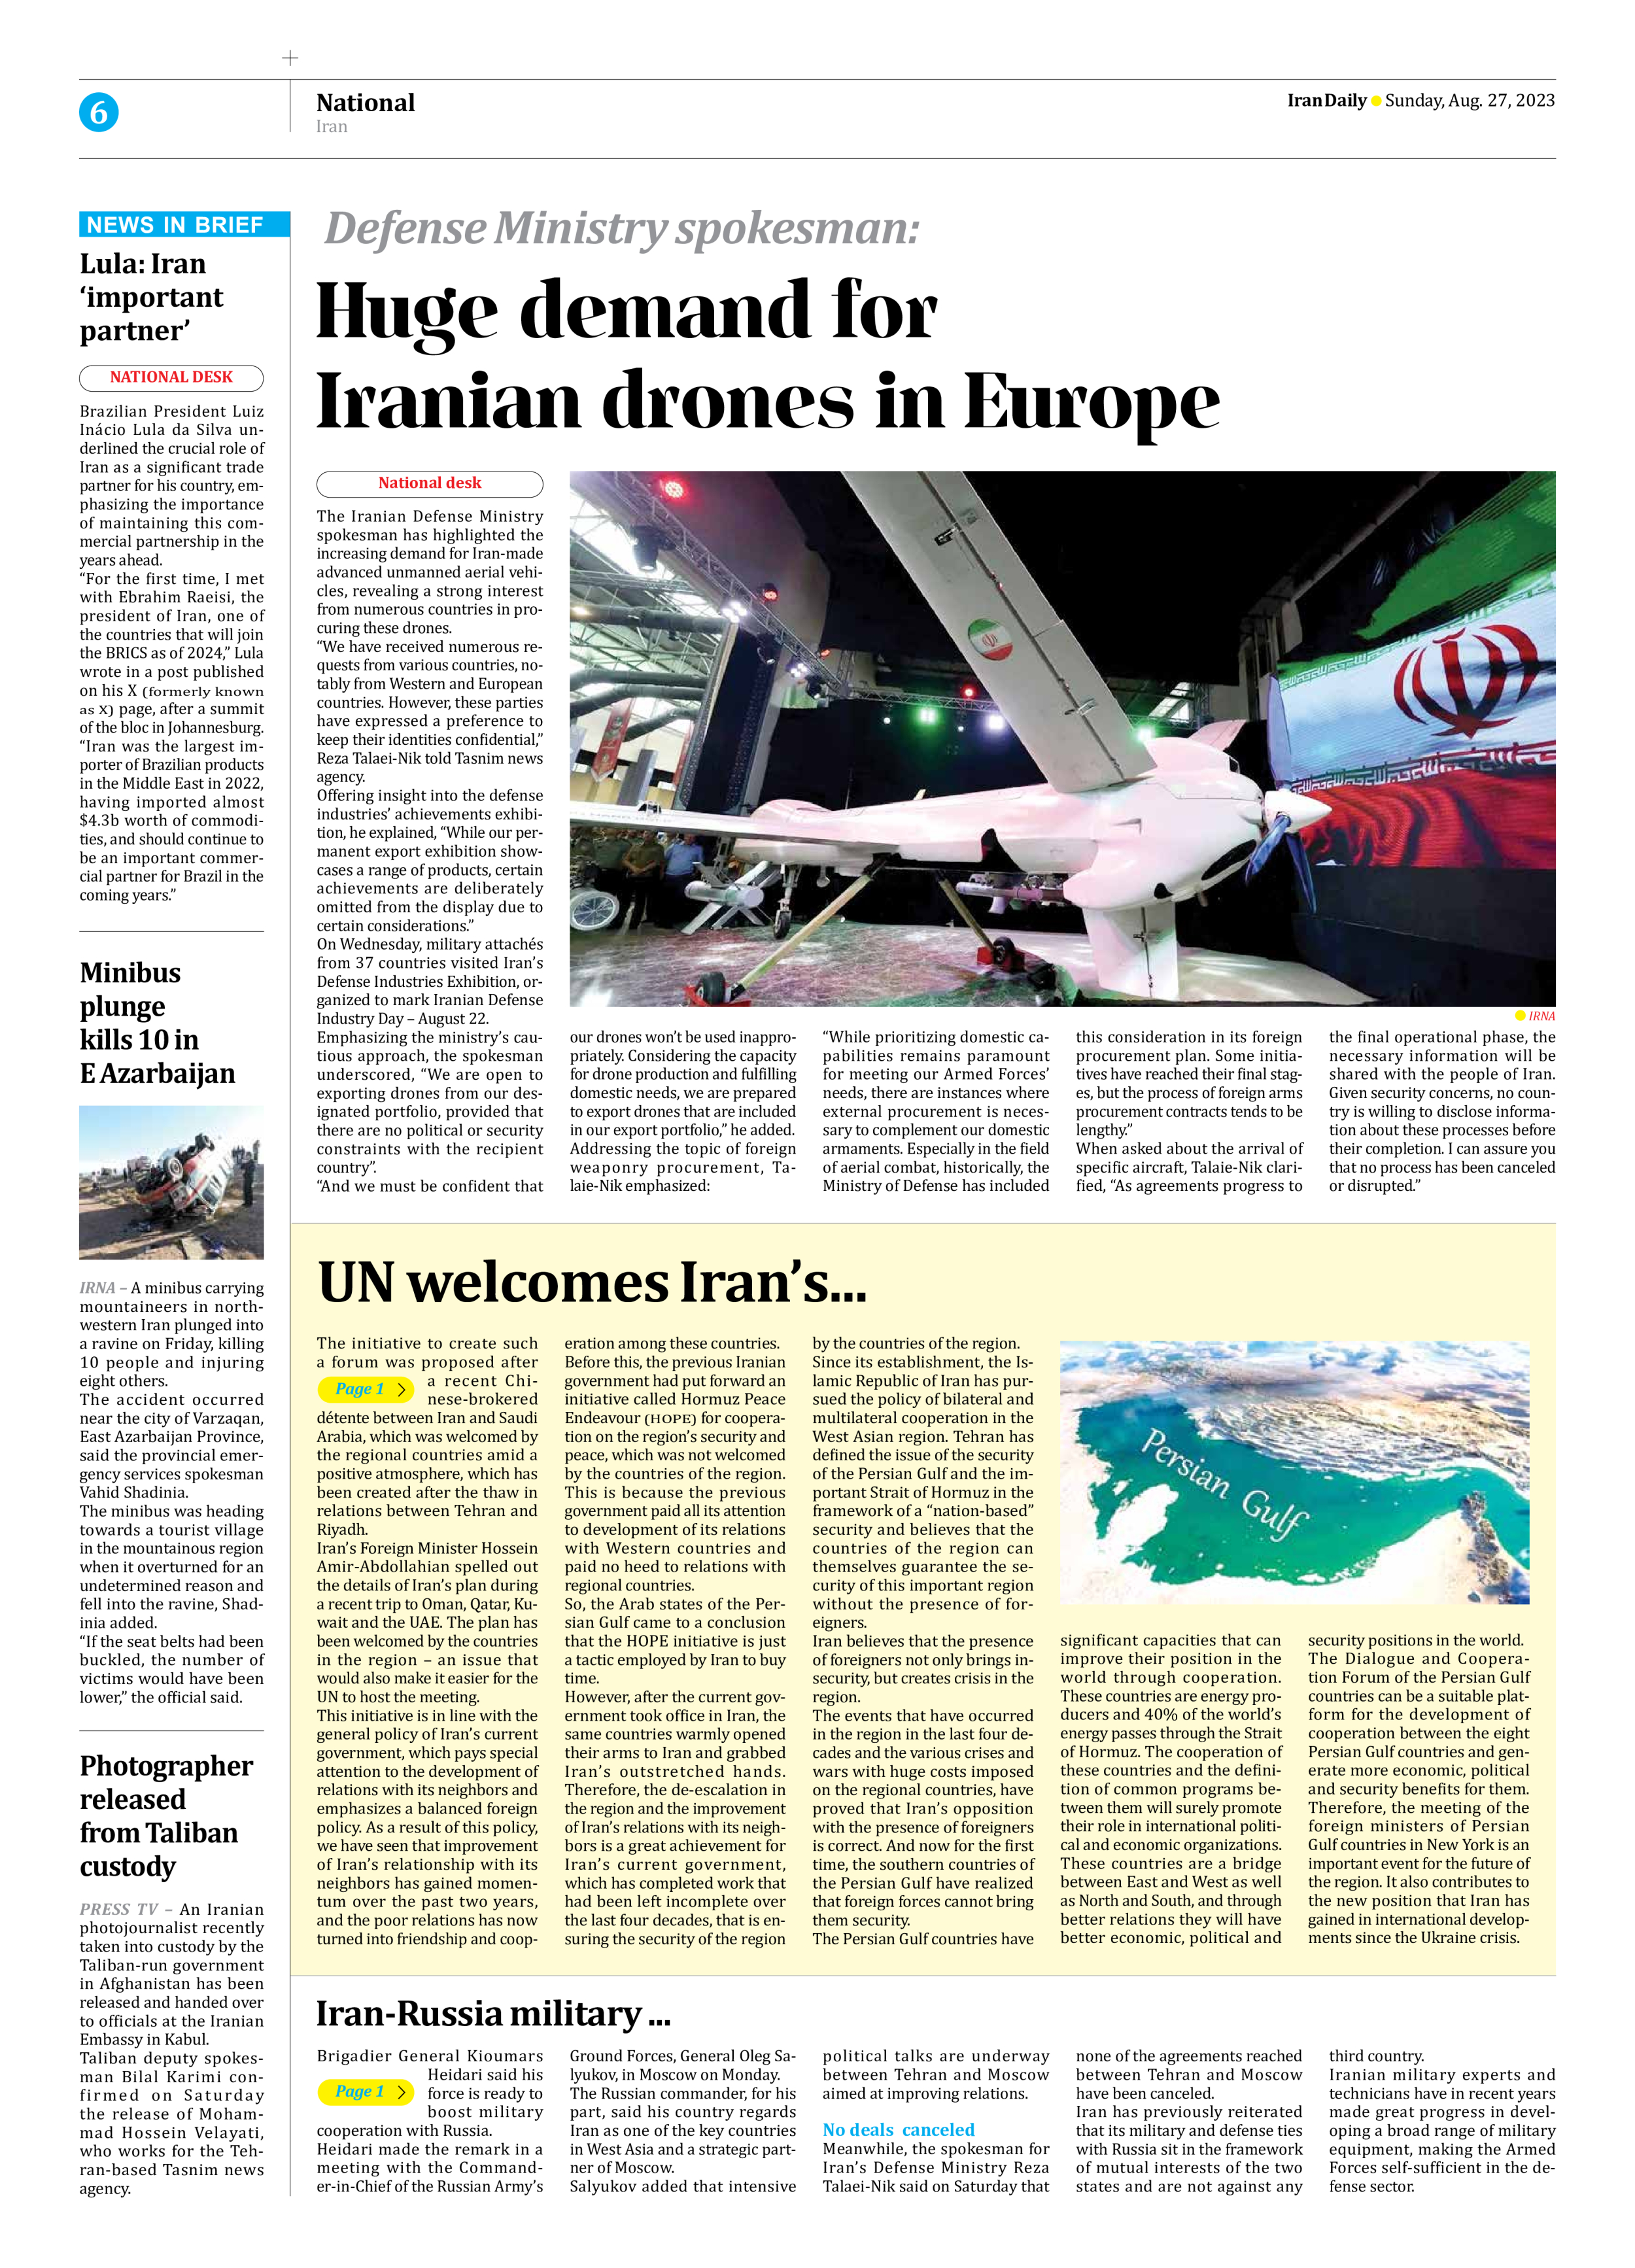 Iran Daily - Number Seven Thousand Three Hundred and Seventy Three - 27 August 2023 - Page 6